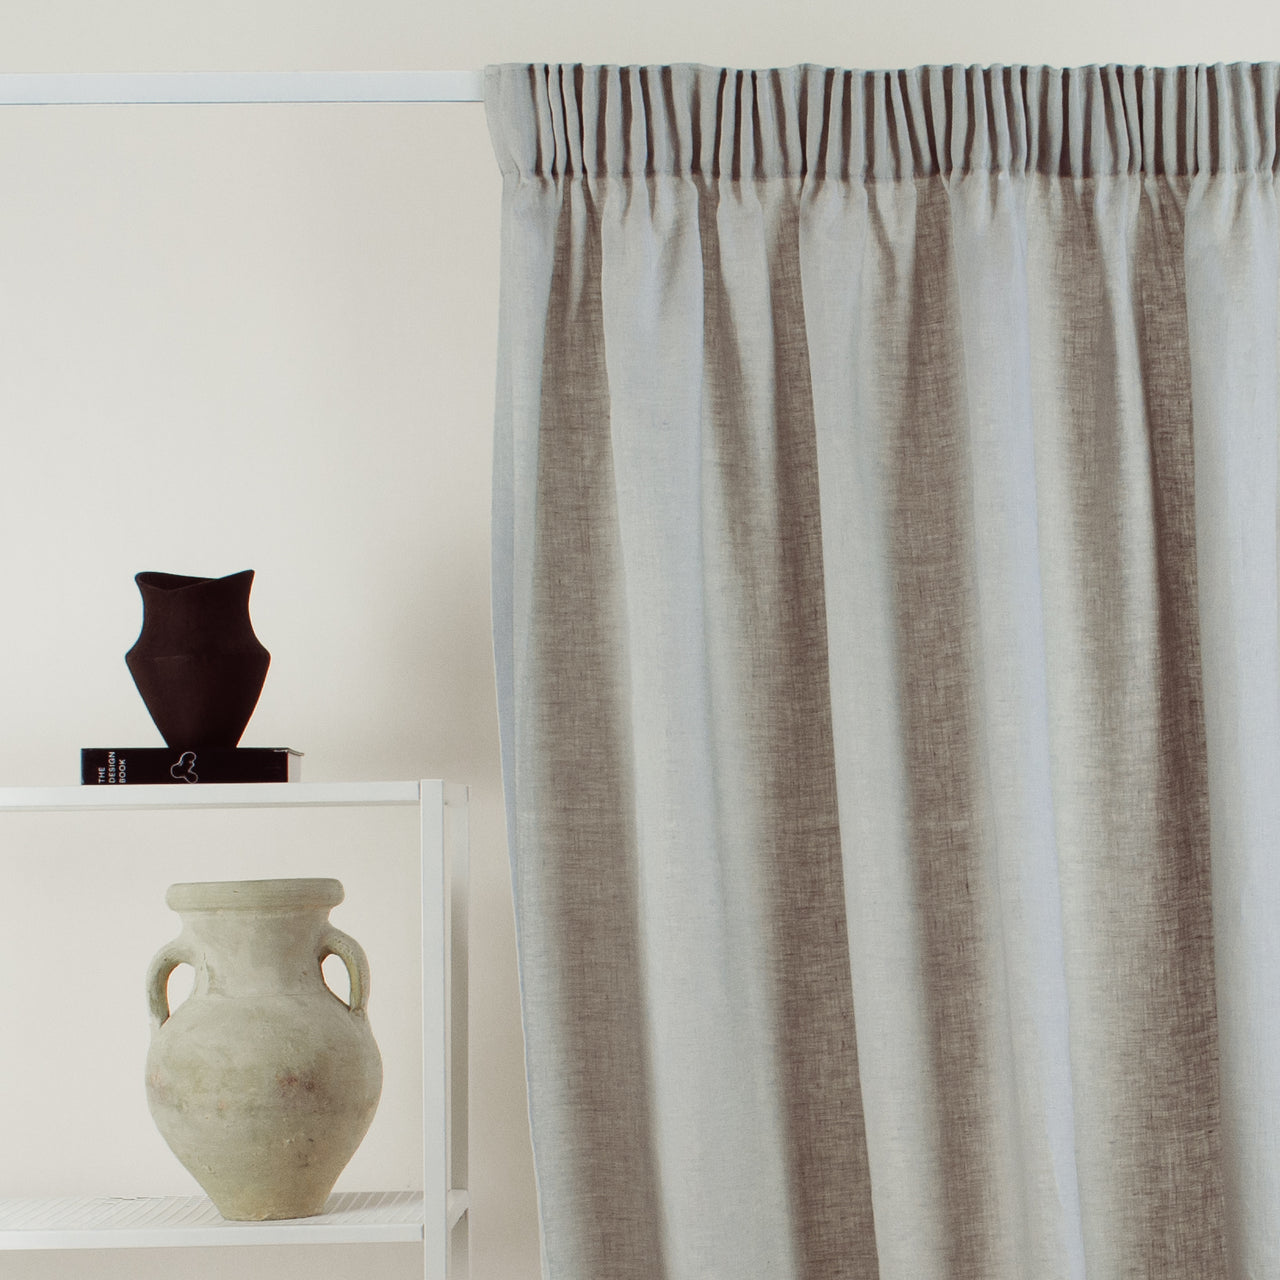 Linen Curtain for Ceiling Track with Cotton Lining - Window Draperies - White, Natural, Grey Colors